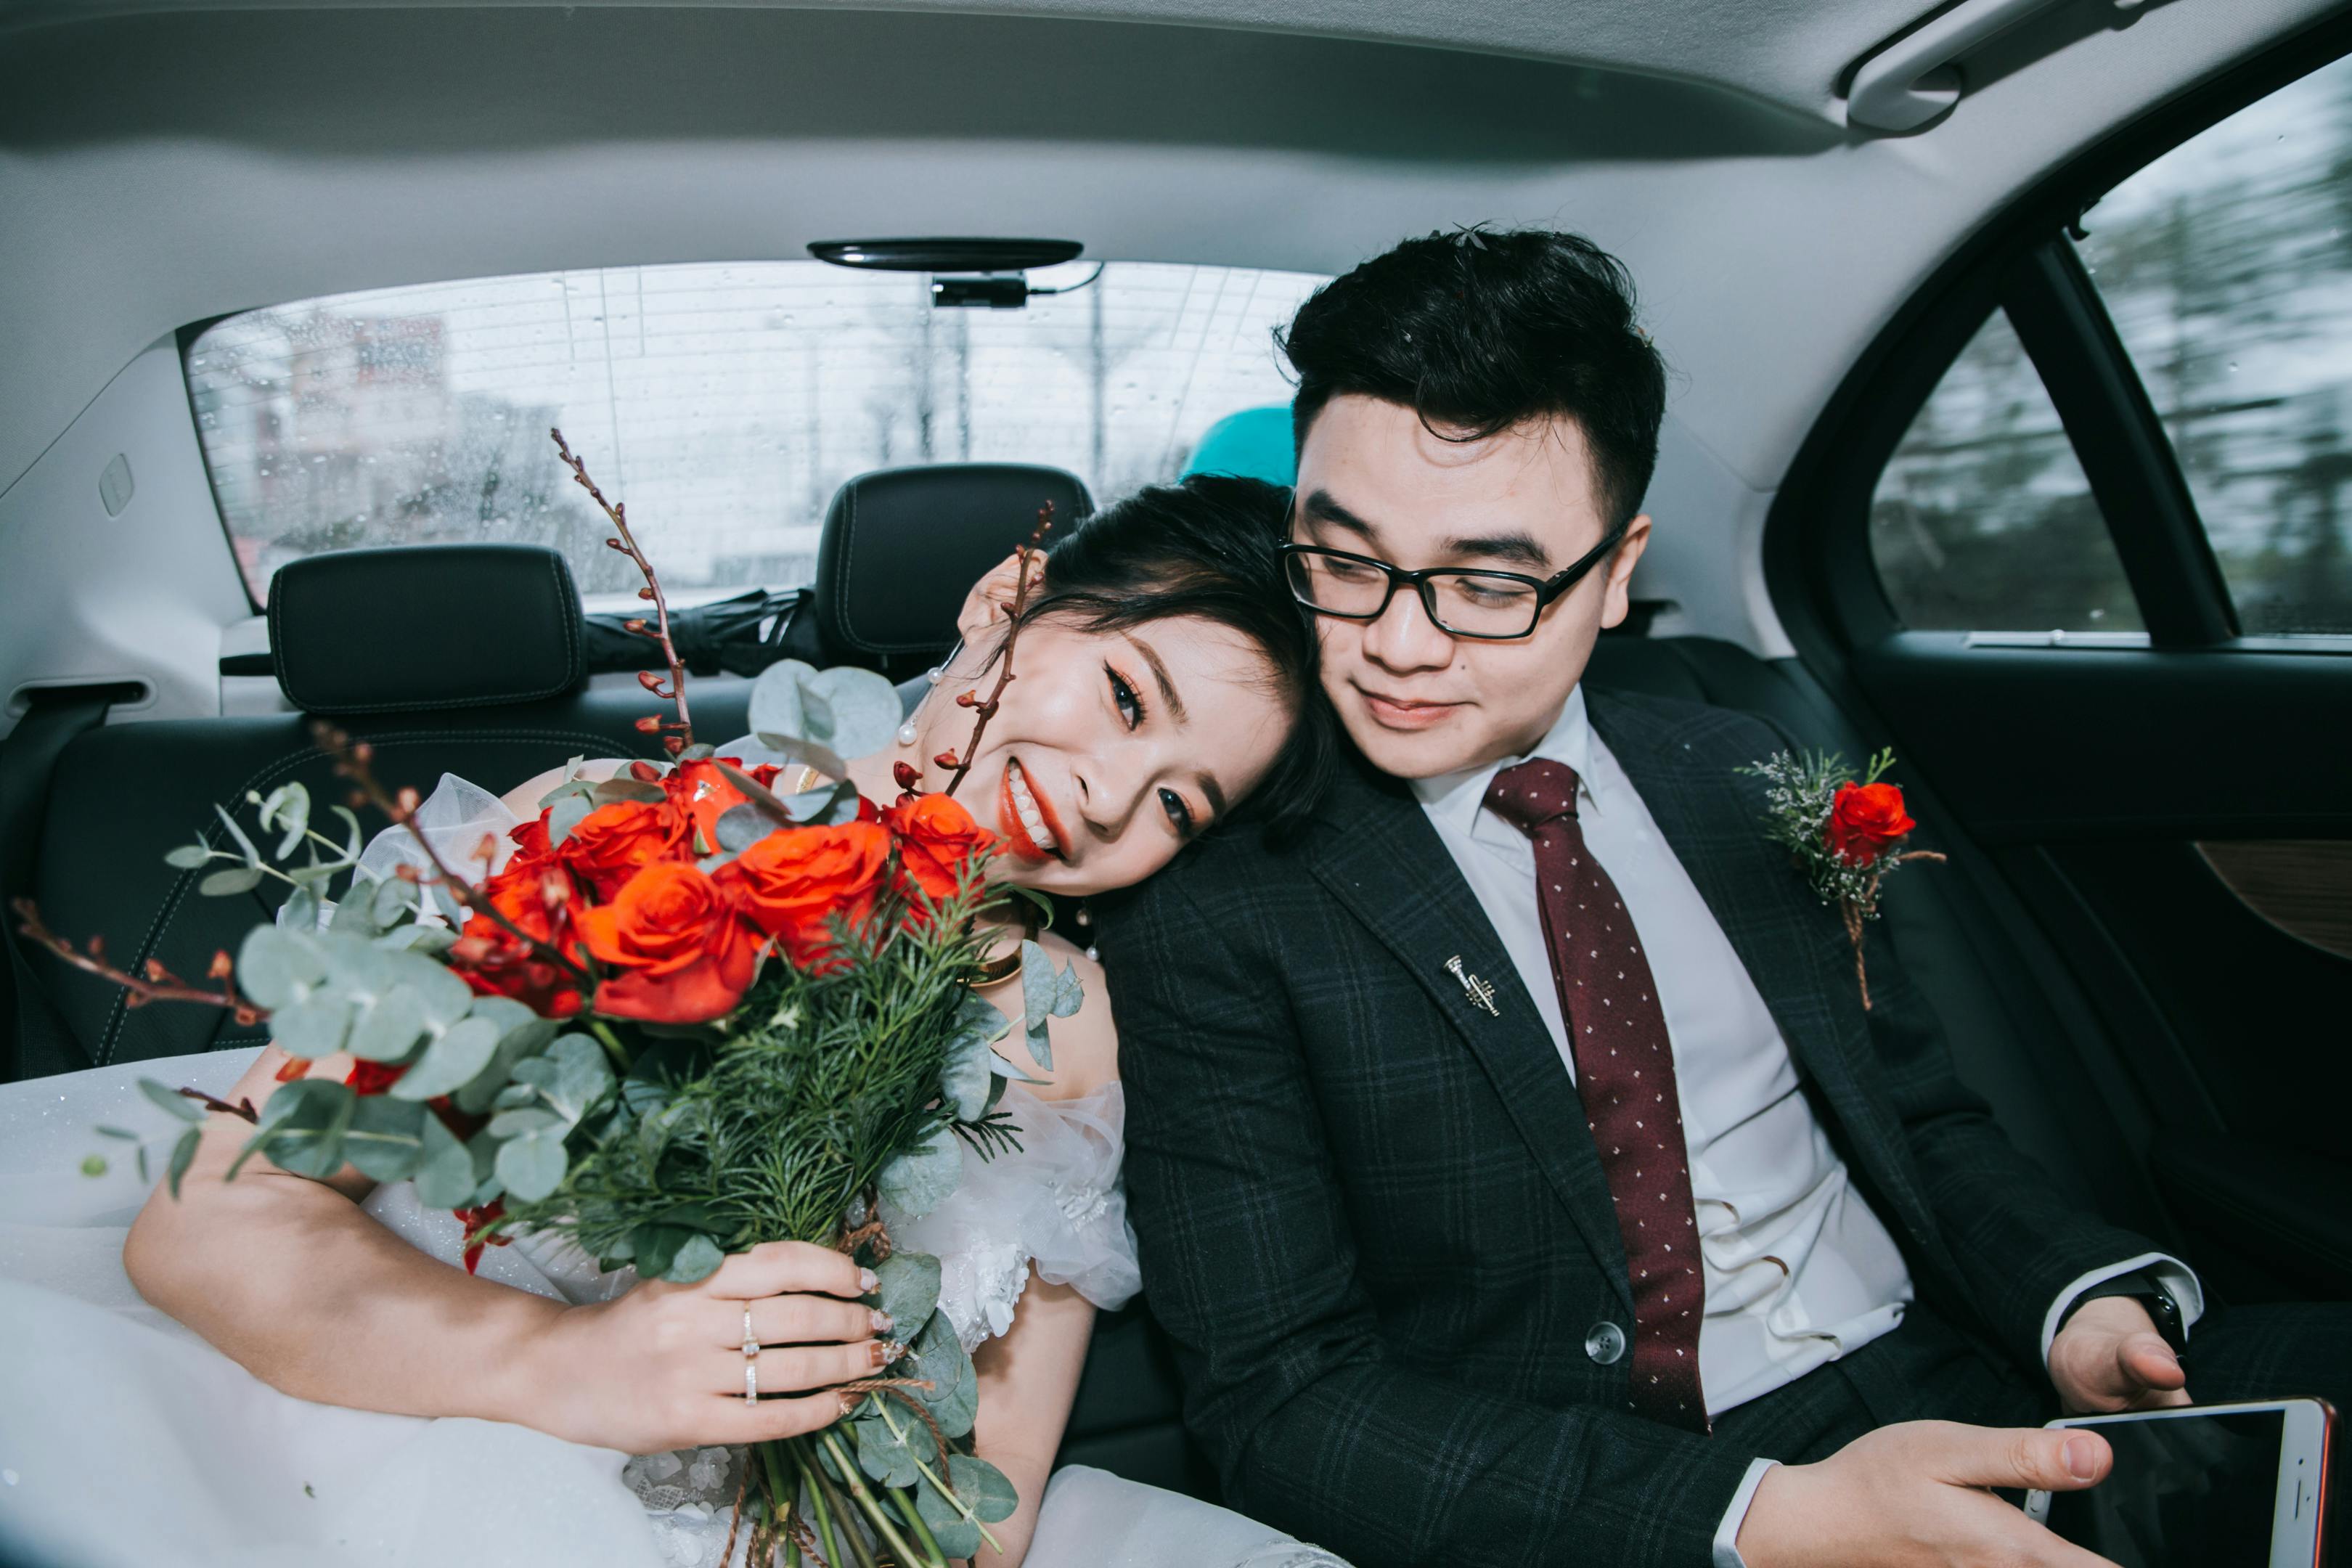 Happy newlywed couple in a car | Source: Pexels